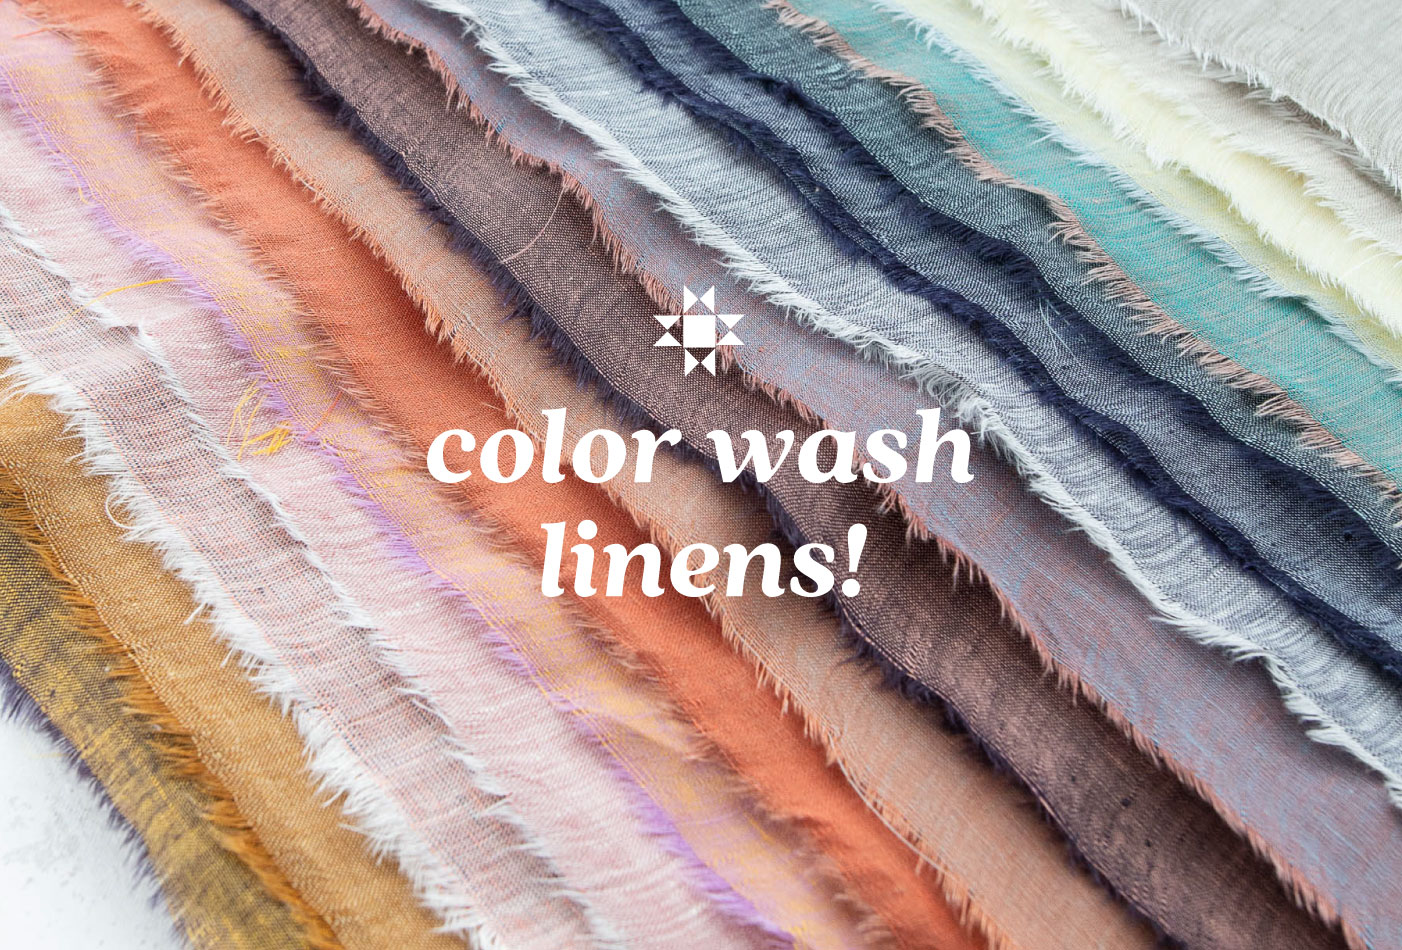 Color Wash Linens are back in stock!